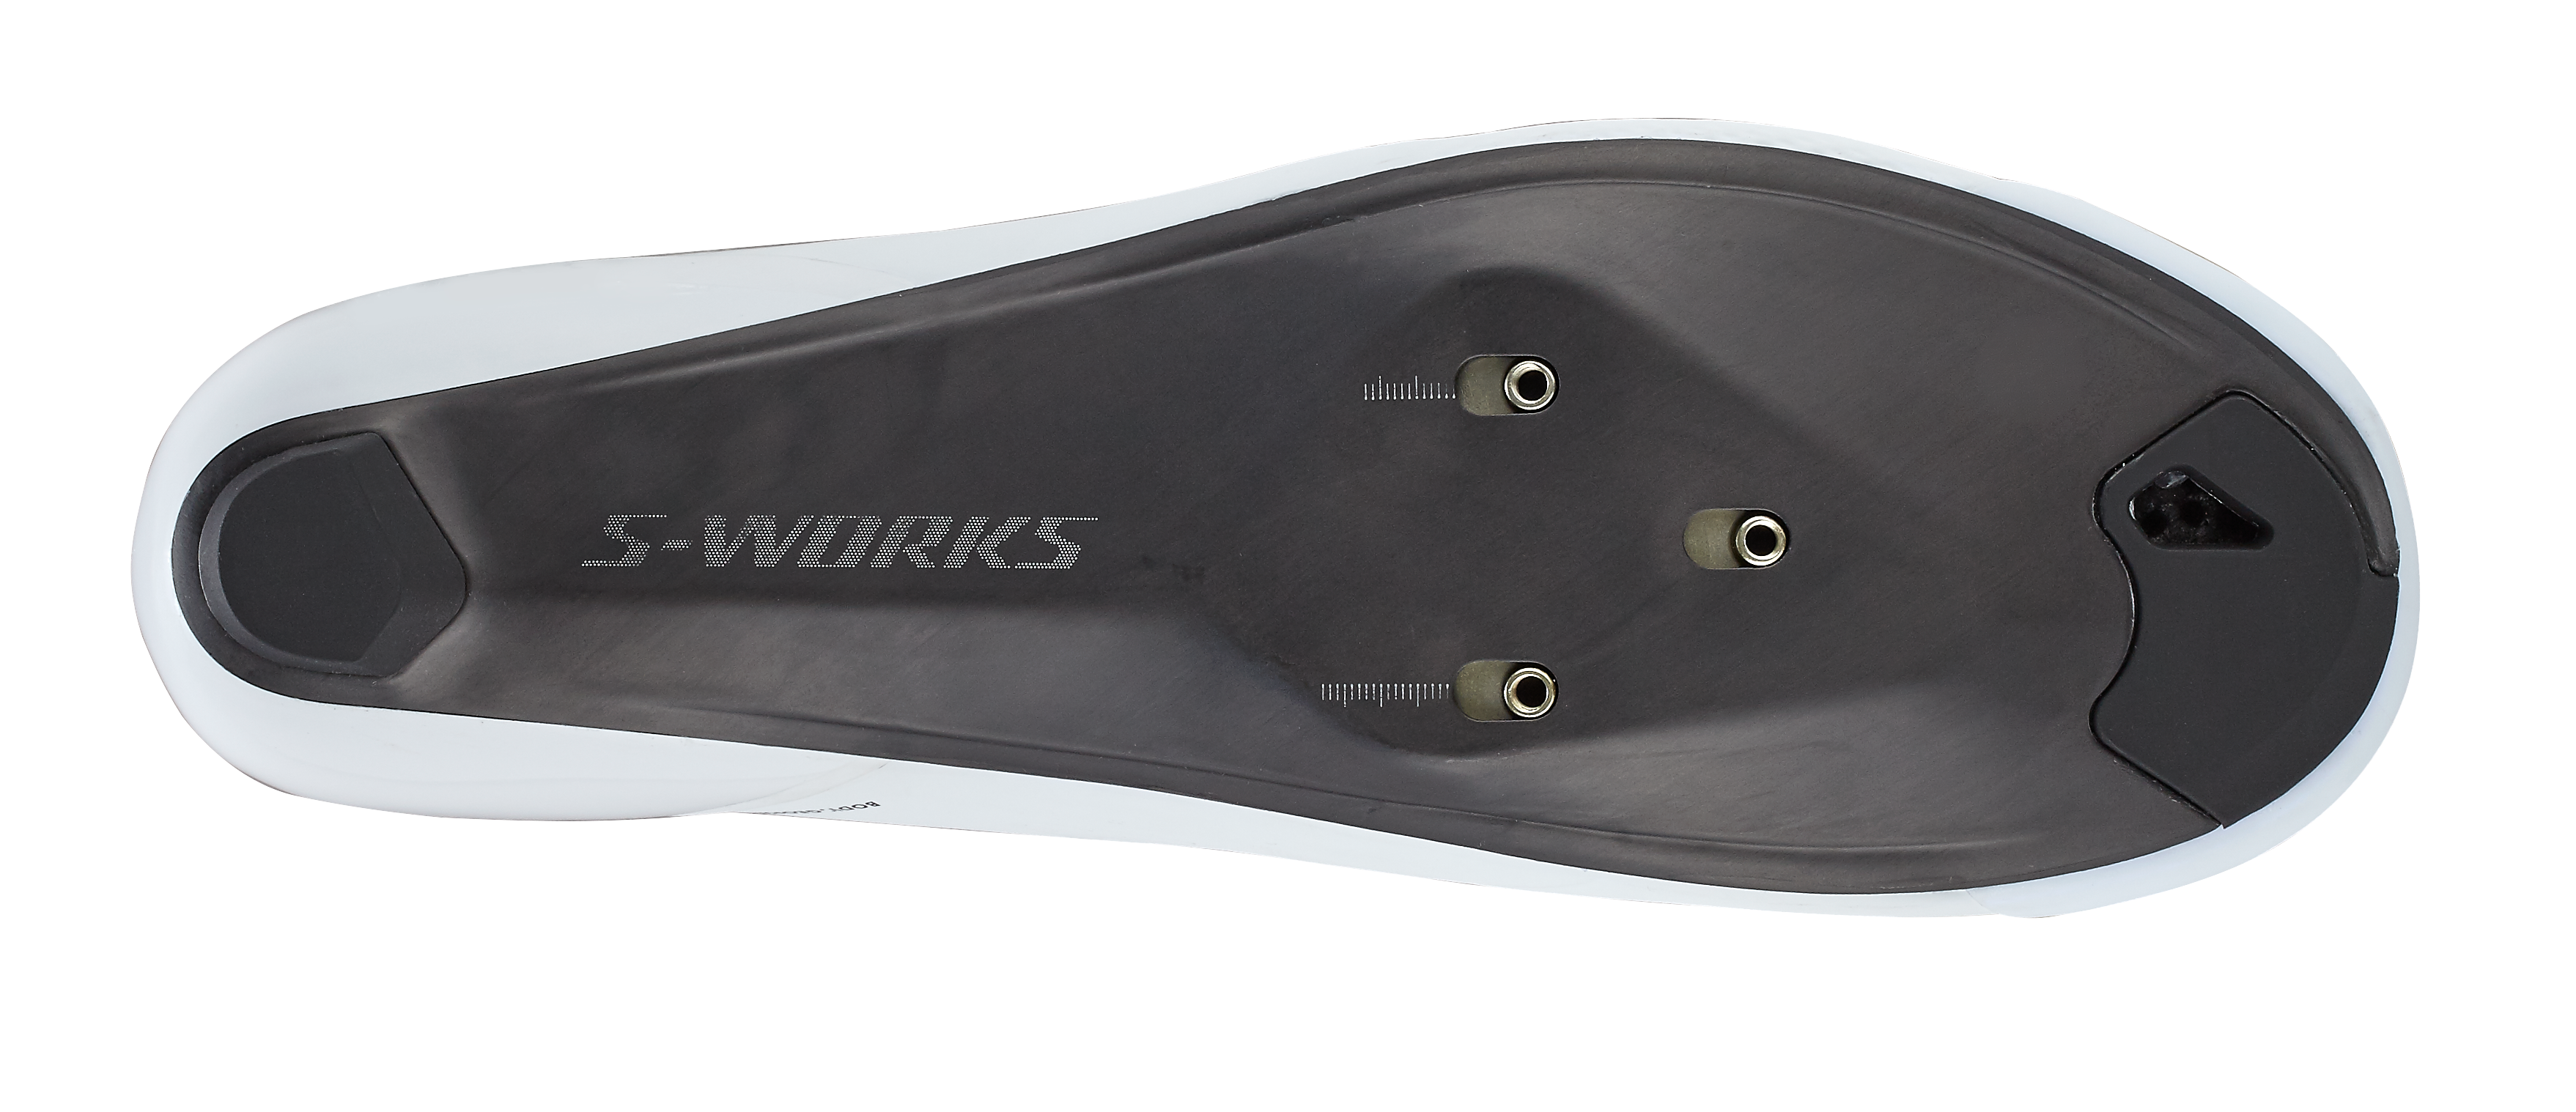 S-Works Torch